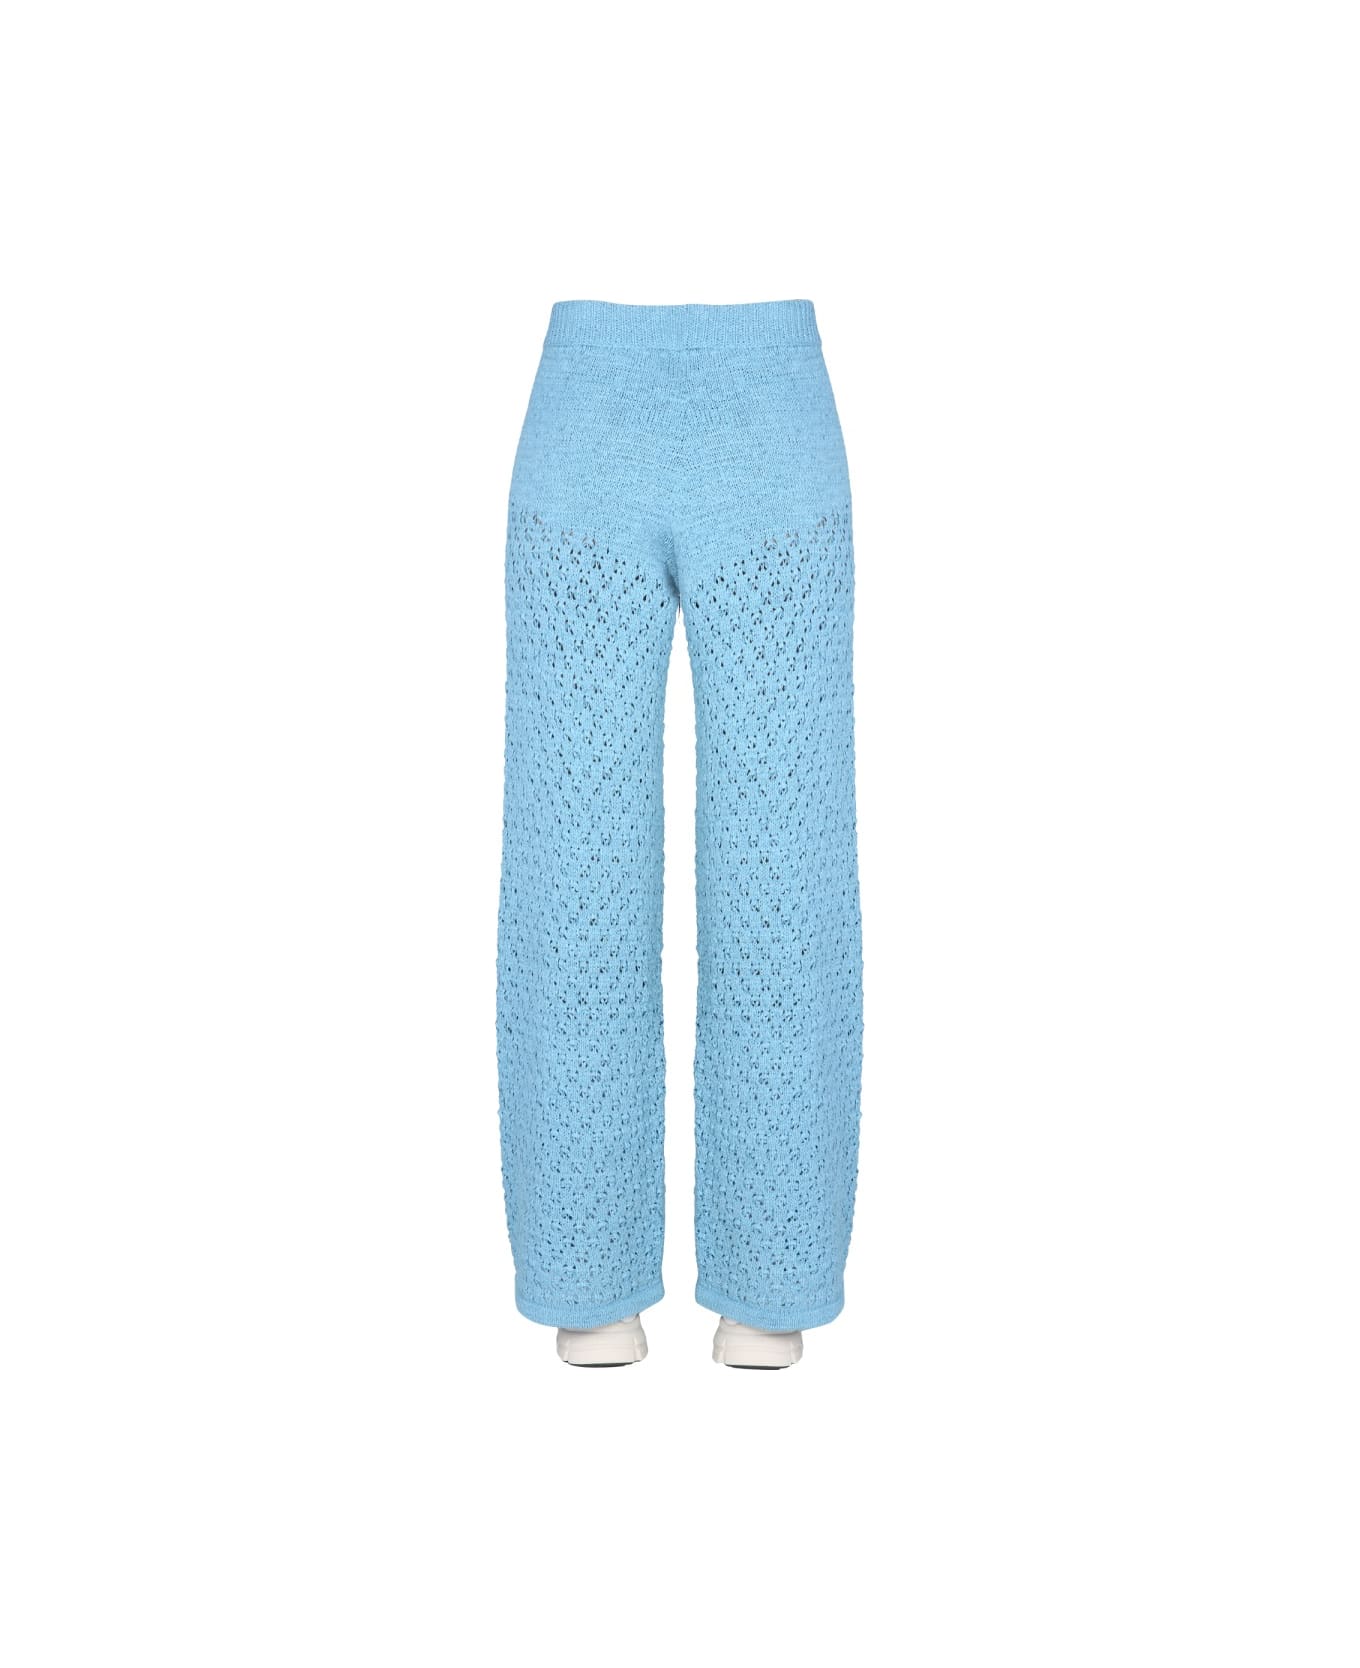 Rotate by Birger Christensen "calla" Trousers - BABY BLUE ボトムス